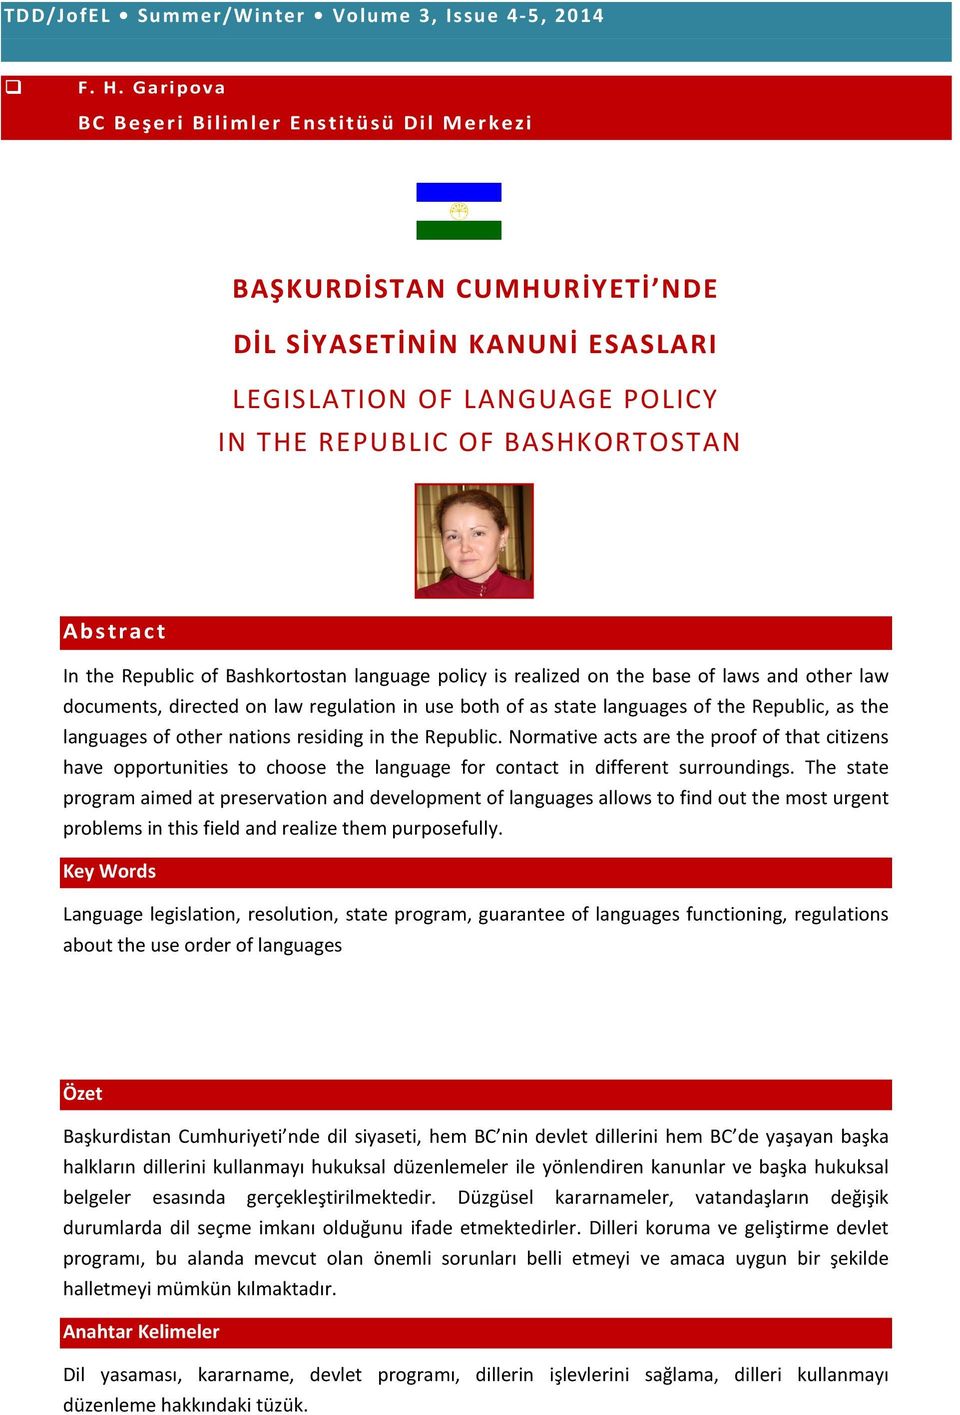 of Bashkortostan language policy is realized on the base of laws and other law documents, directed on law regulation in use both of as state languages of the Republic, as the languages of other